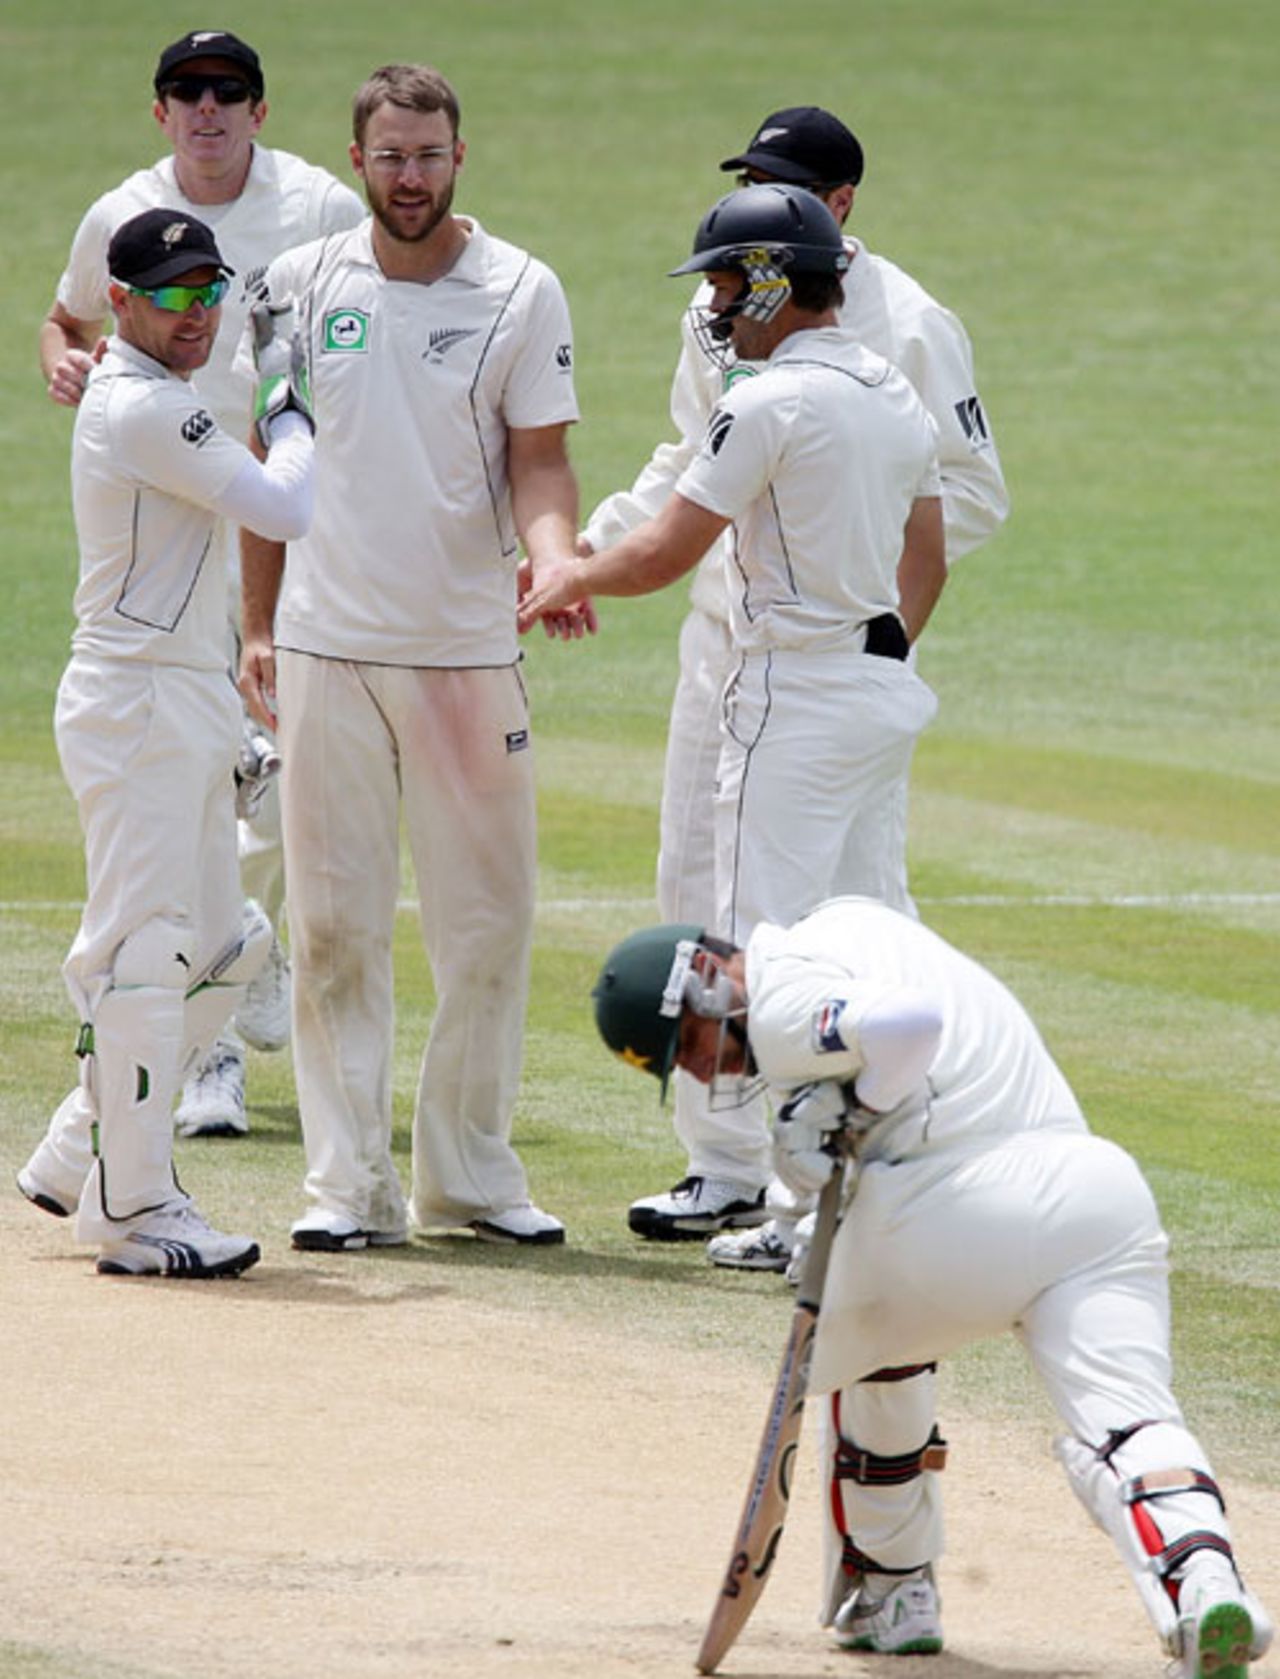 Misbah-ul-Haq looks to see where his backfoot is after Brendon McCullum stumped him, New Zealand v Pakistan, 3rd Test, Napier, 5th day, December 15, 2009